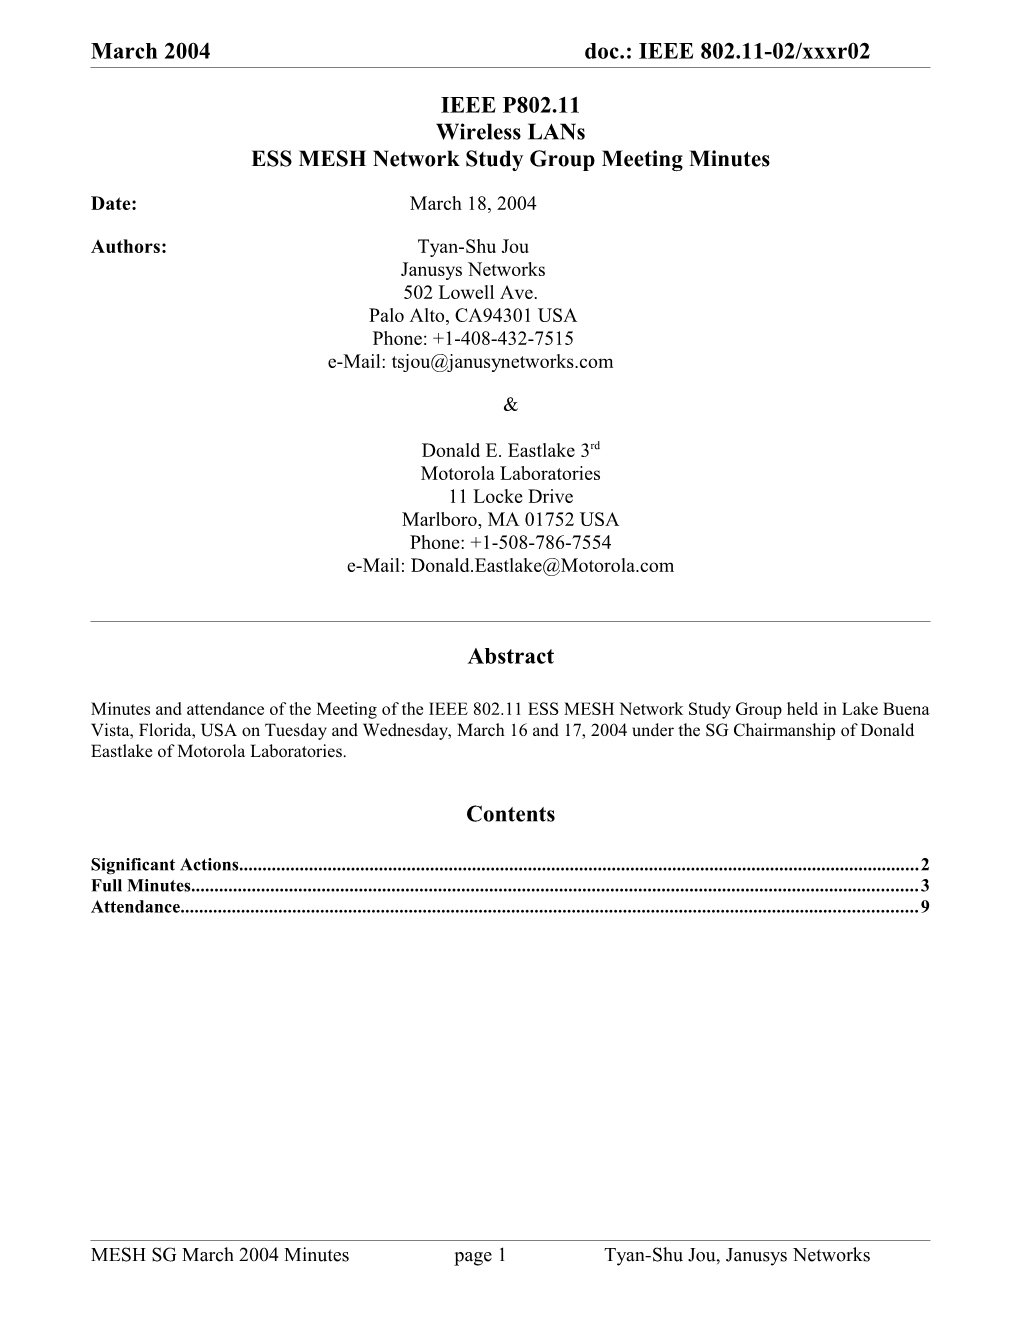 ESS MESH Network Study Group Meeting Minutes